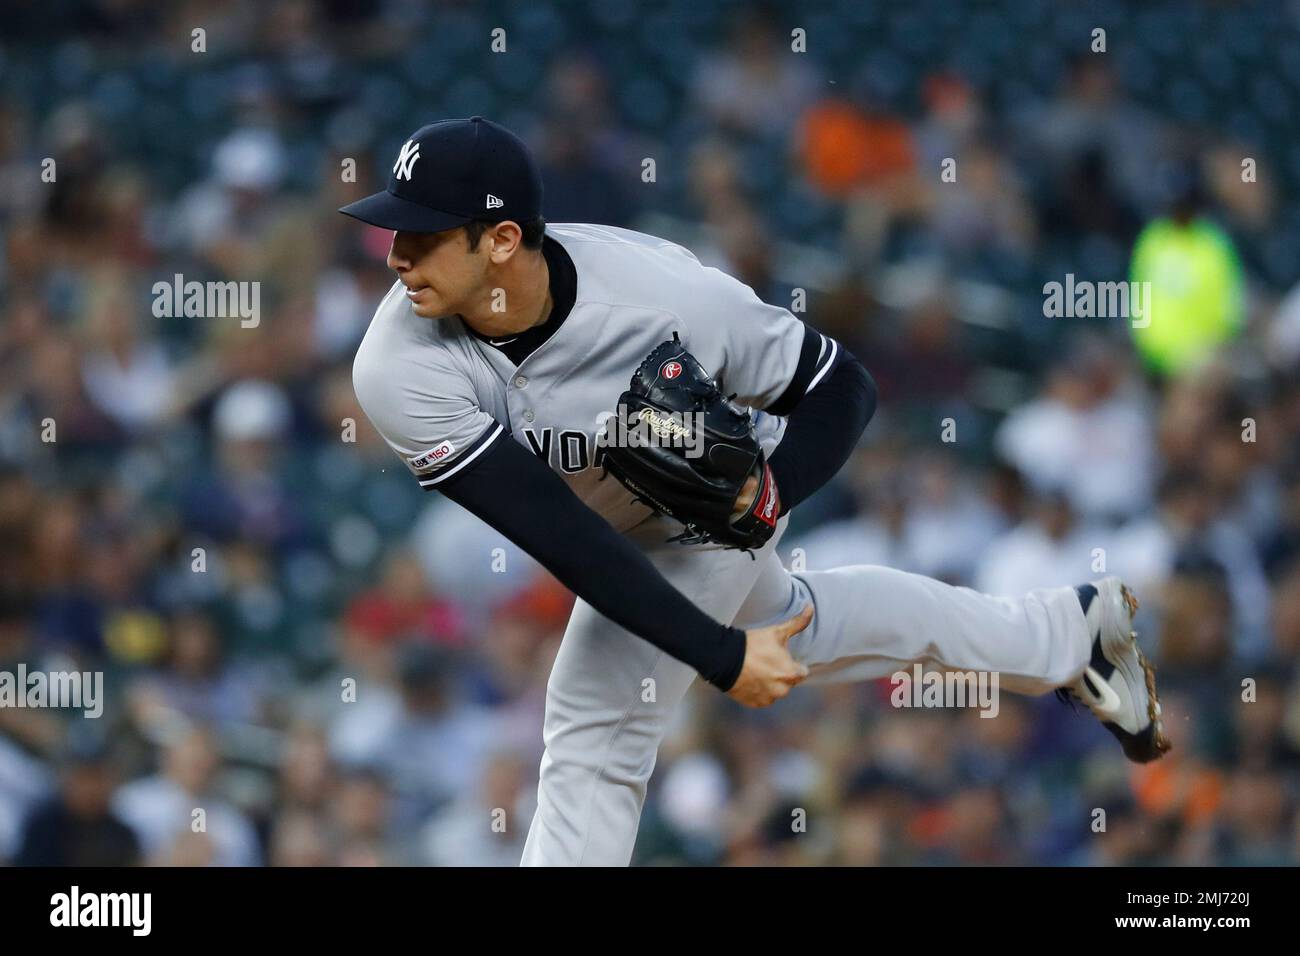 New York Yankees relief pitcher Luis Cessa (85) throws in the third inning of a baseball game in Detroit, Tuesday, Sept